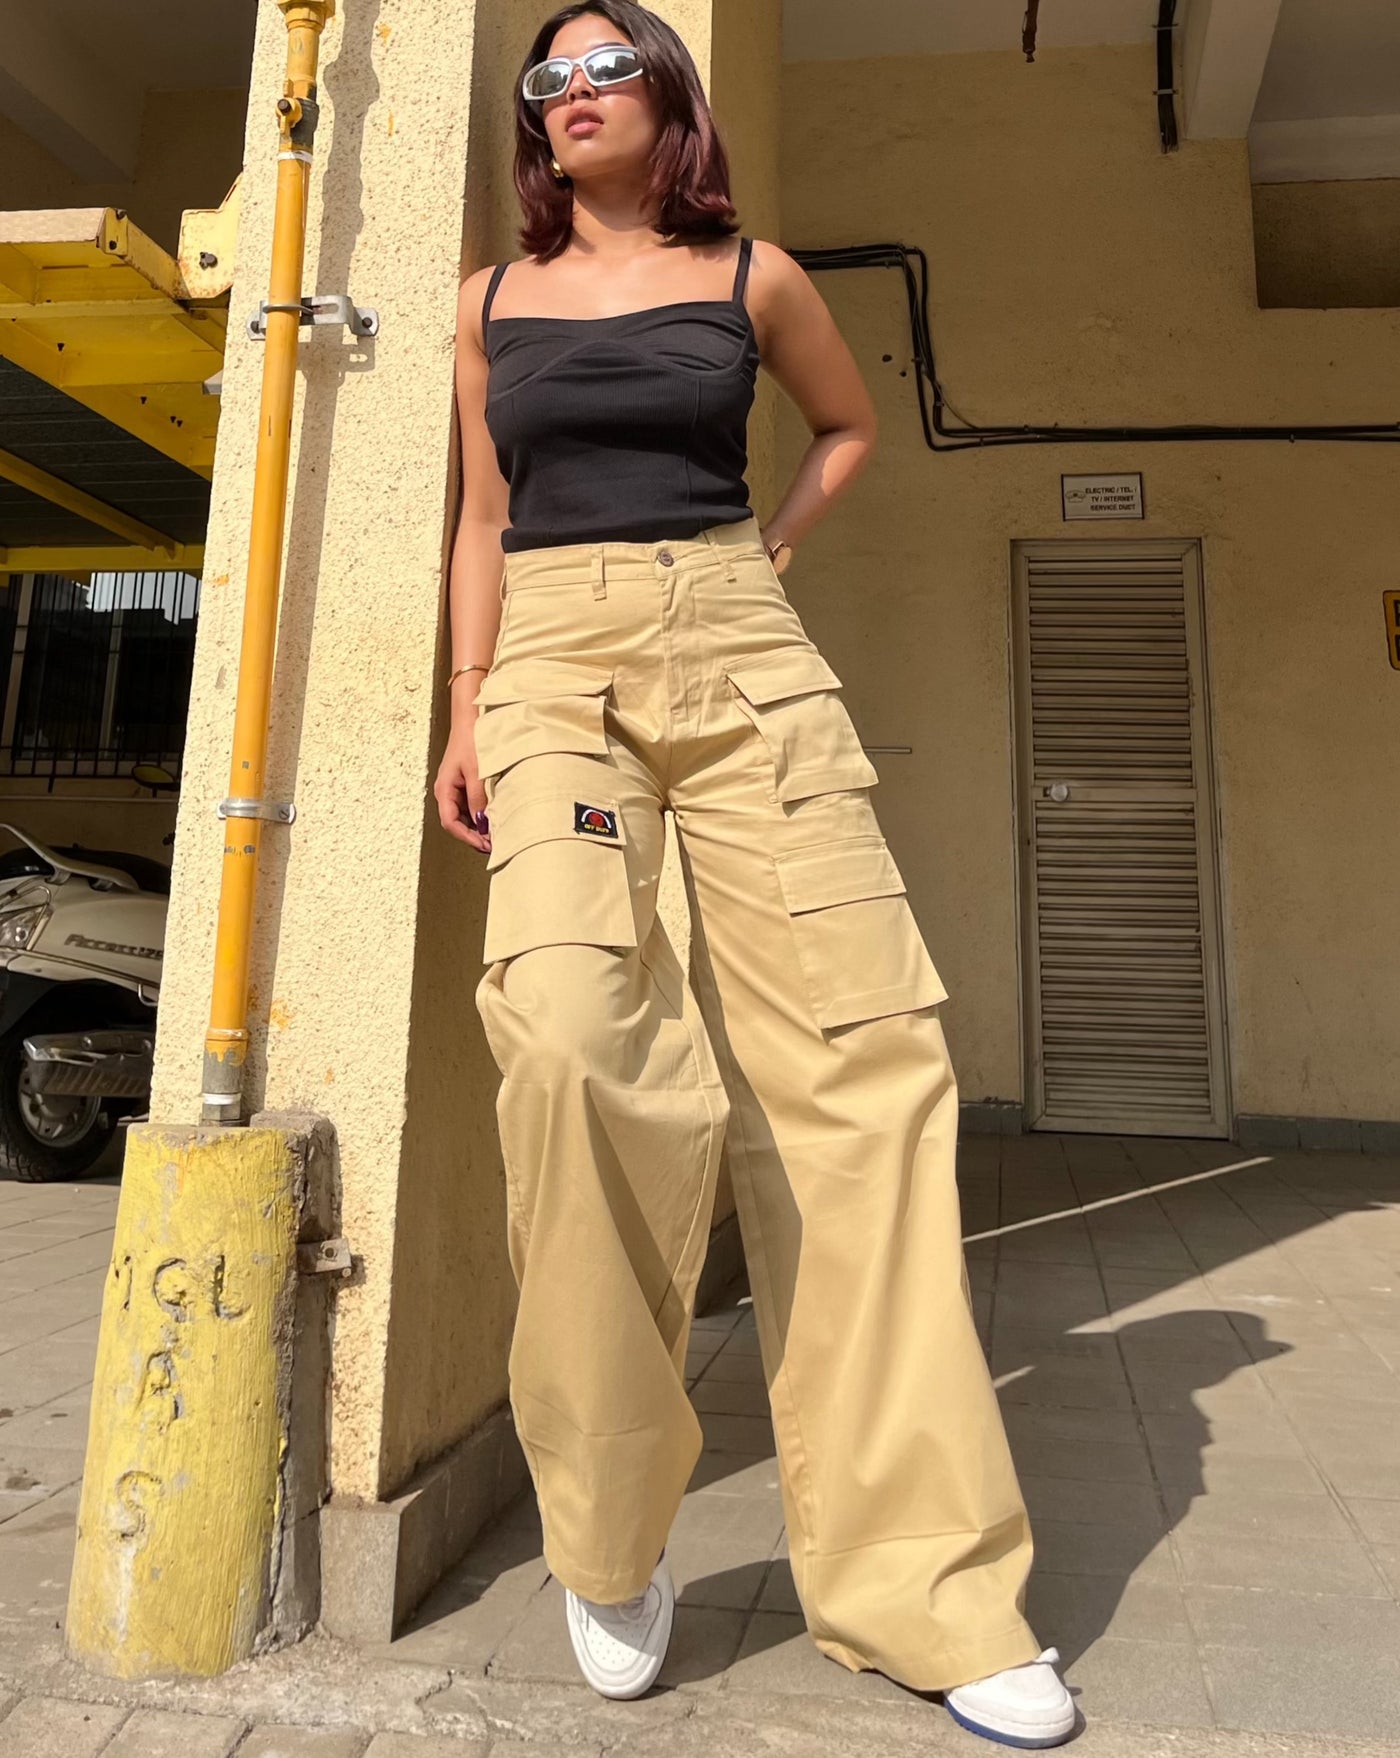 City Chic Multi Pocket Trousers